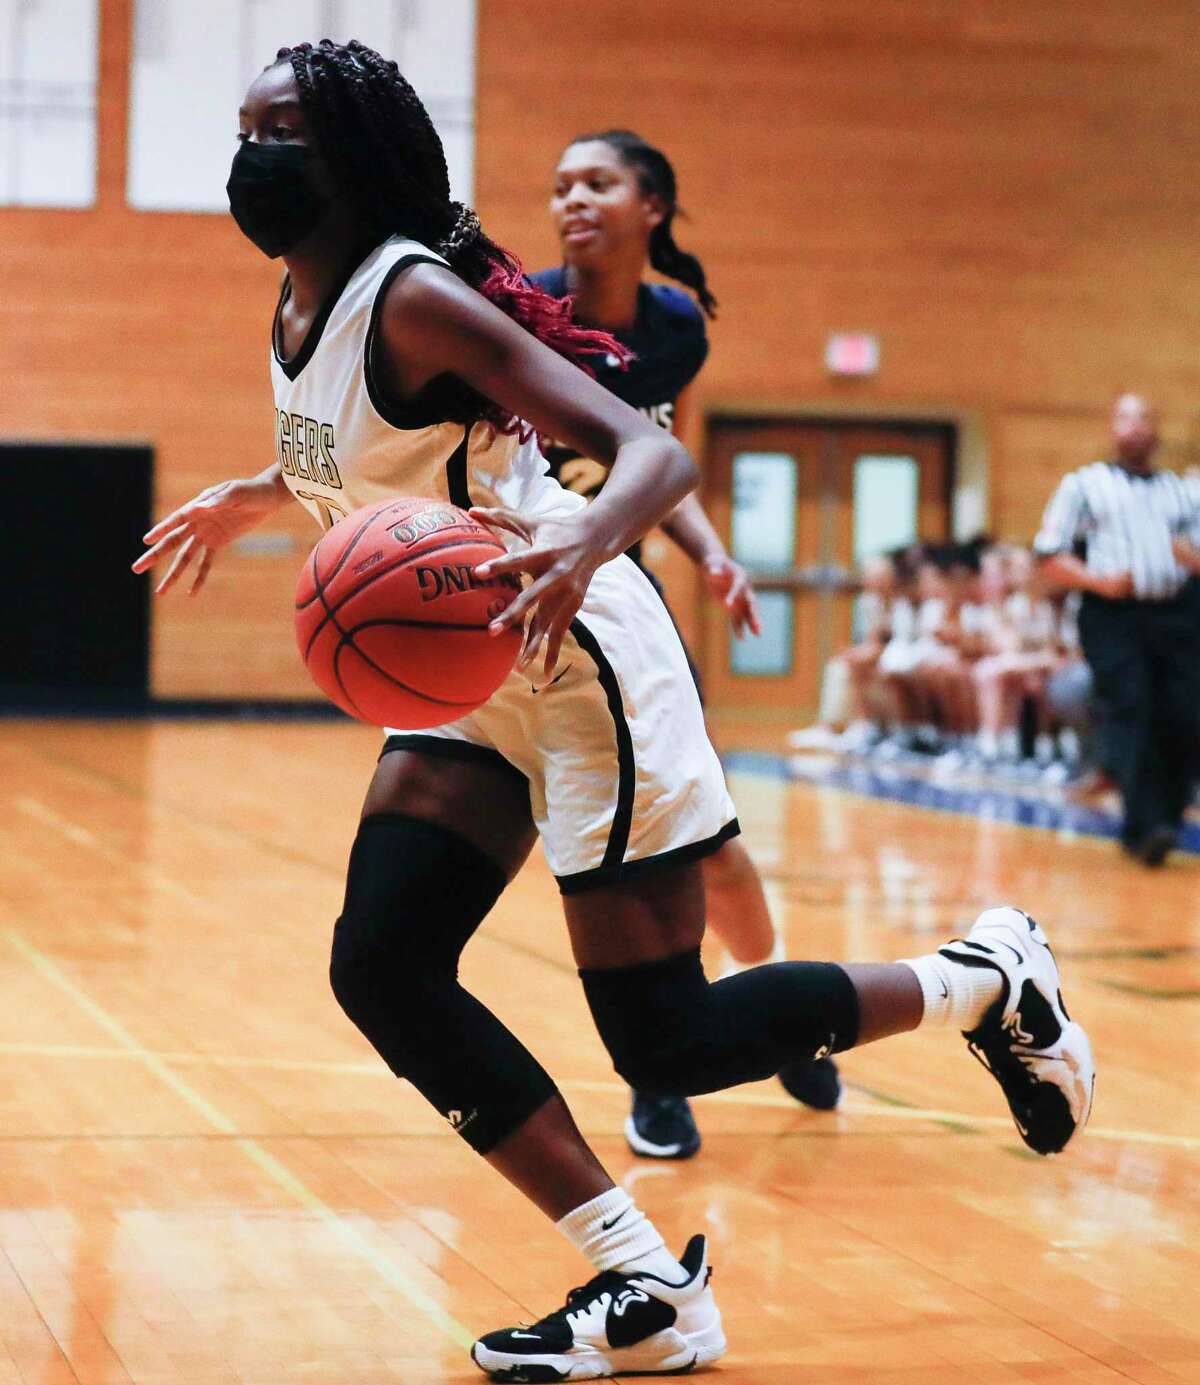 Conroe's Tiarra Howard (12) drives past Klein Collins' Aubrey Campbell (21) during the first quarter of a Region II-6A quarterfinal high school basketball playoff game at Dekaney High School, Tuesday, Feb. 22, 2022, in Spring.